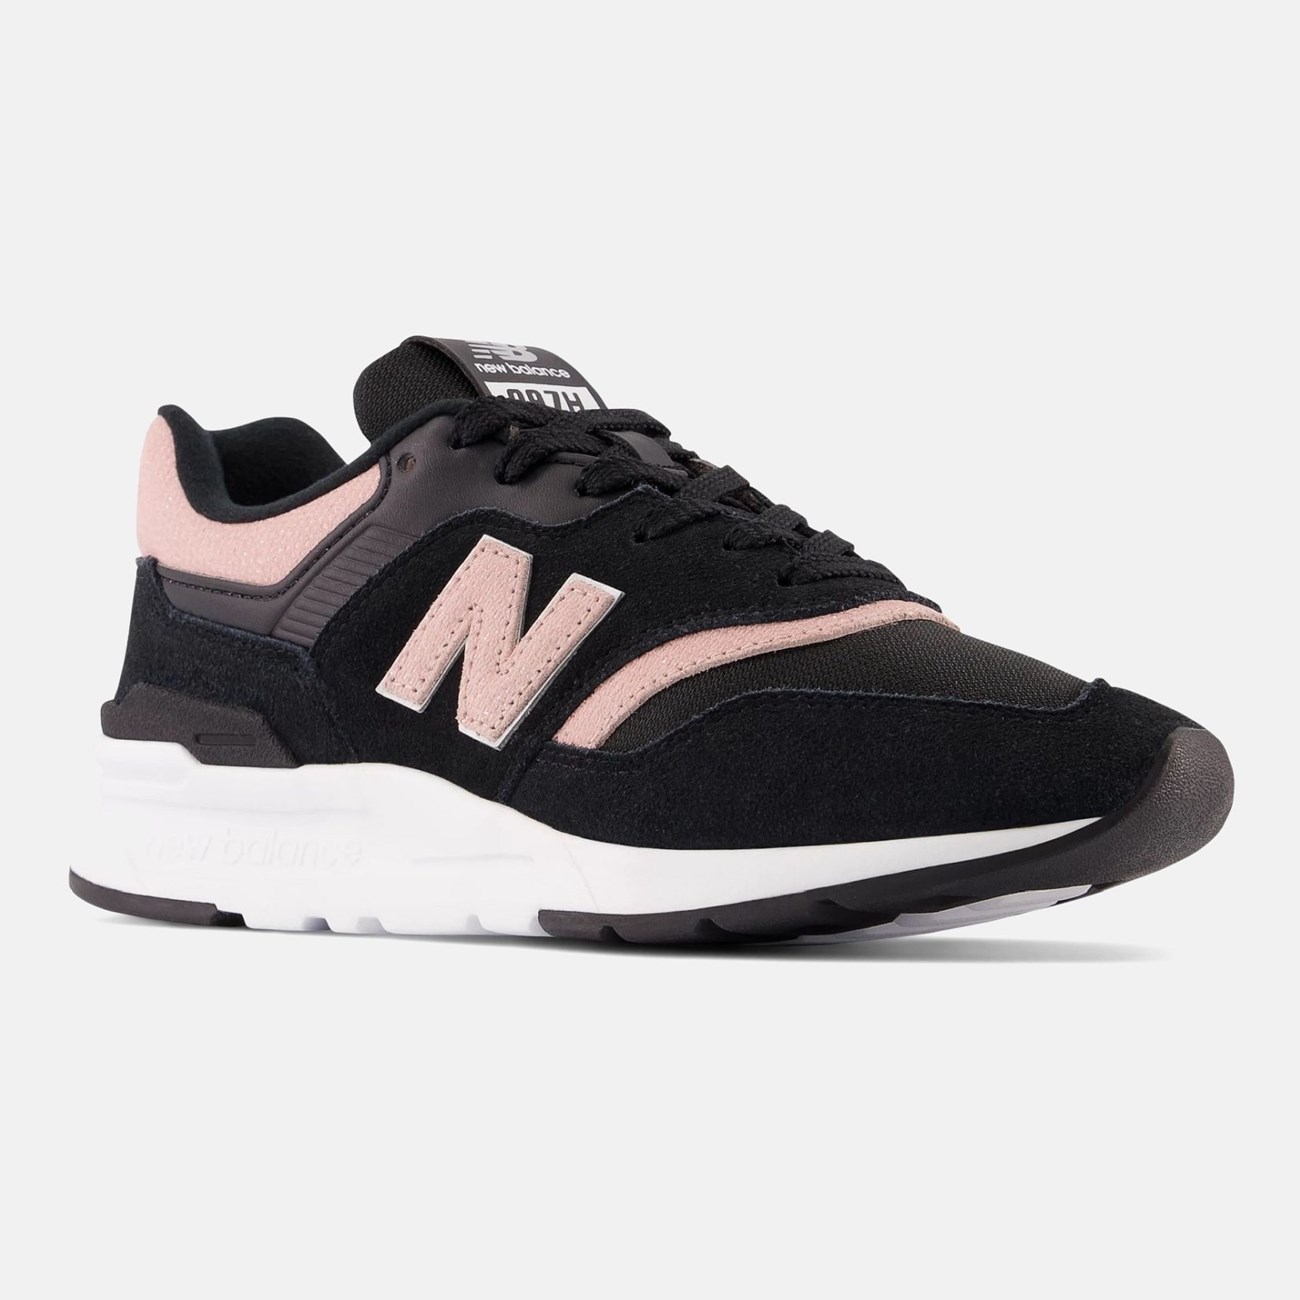 NEW BALANCE Γυναικεία Sneakers 997H CW997 - The Athlete's Foot